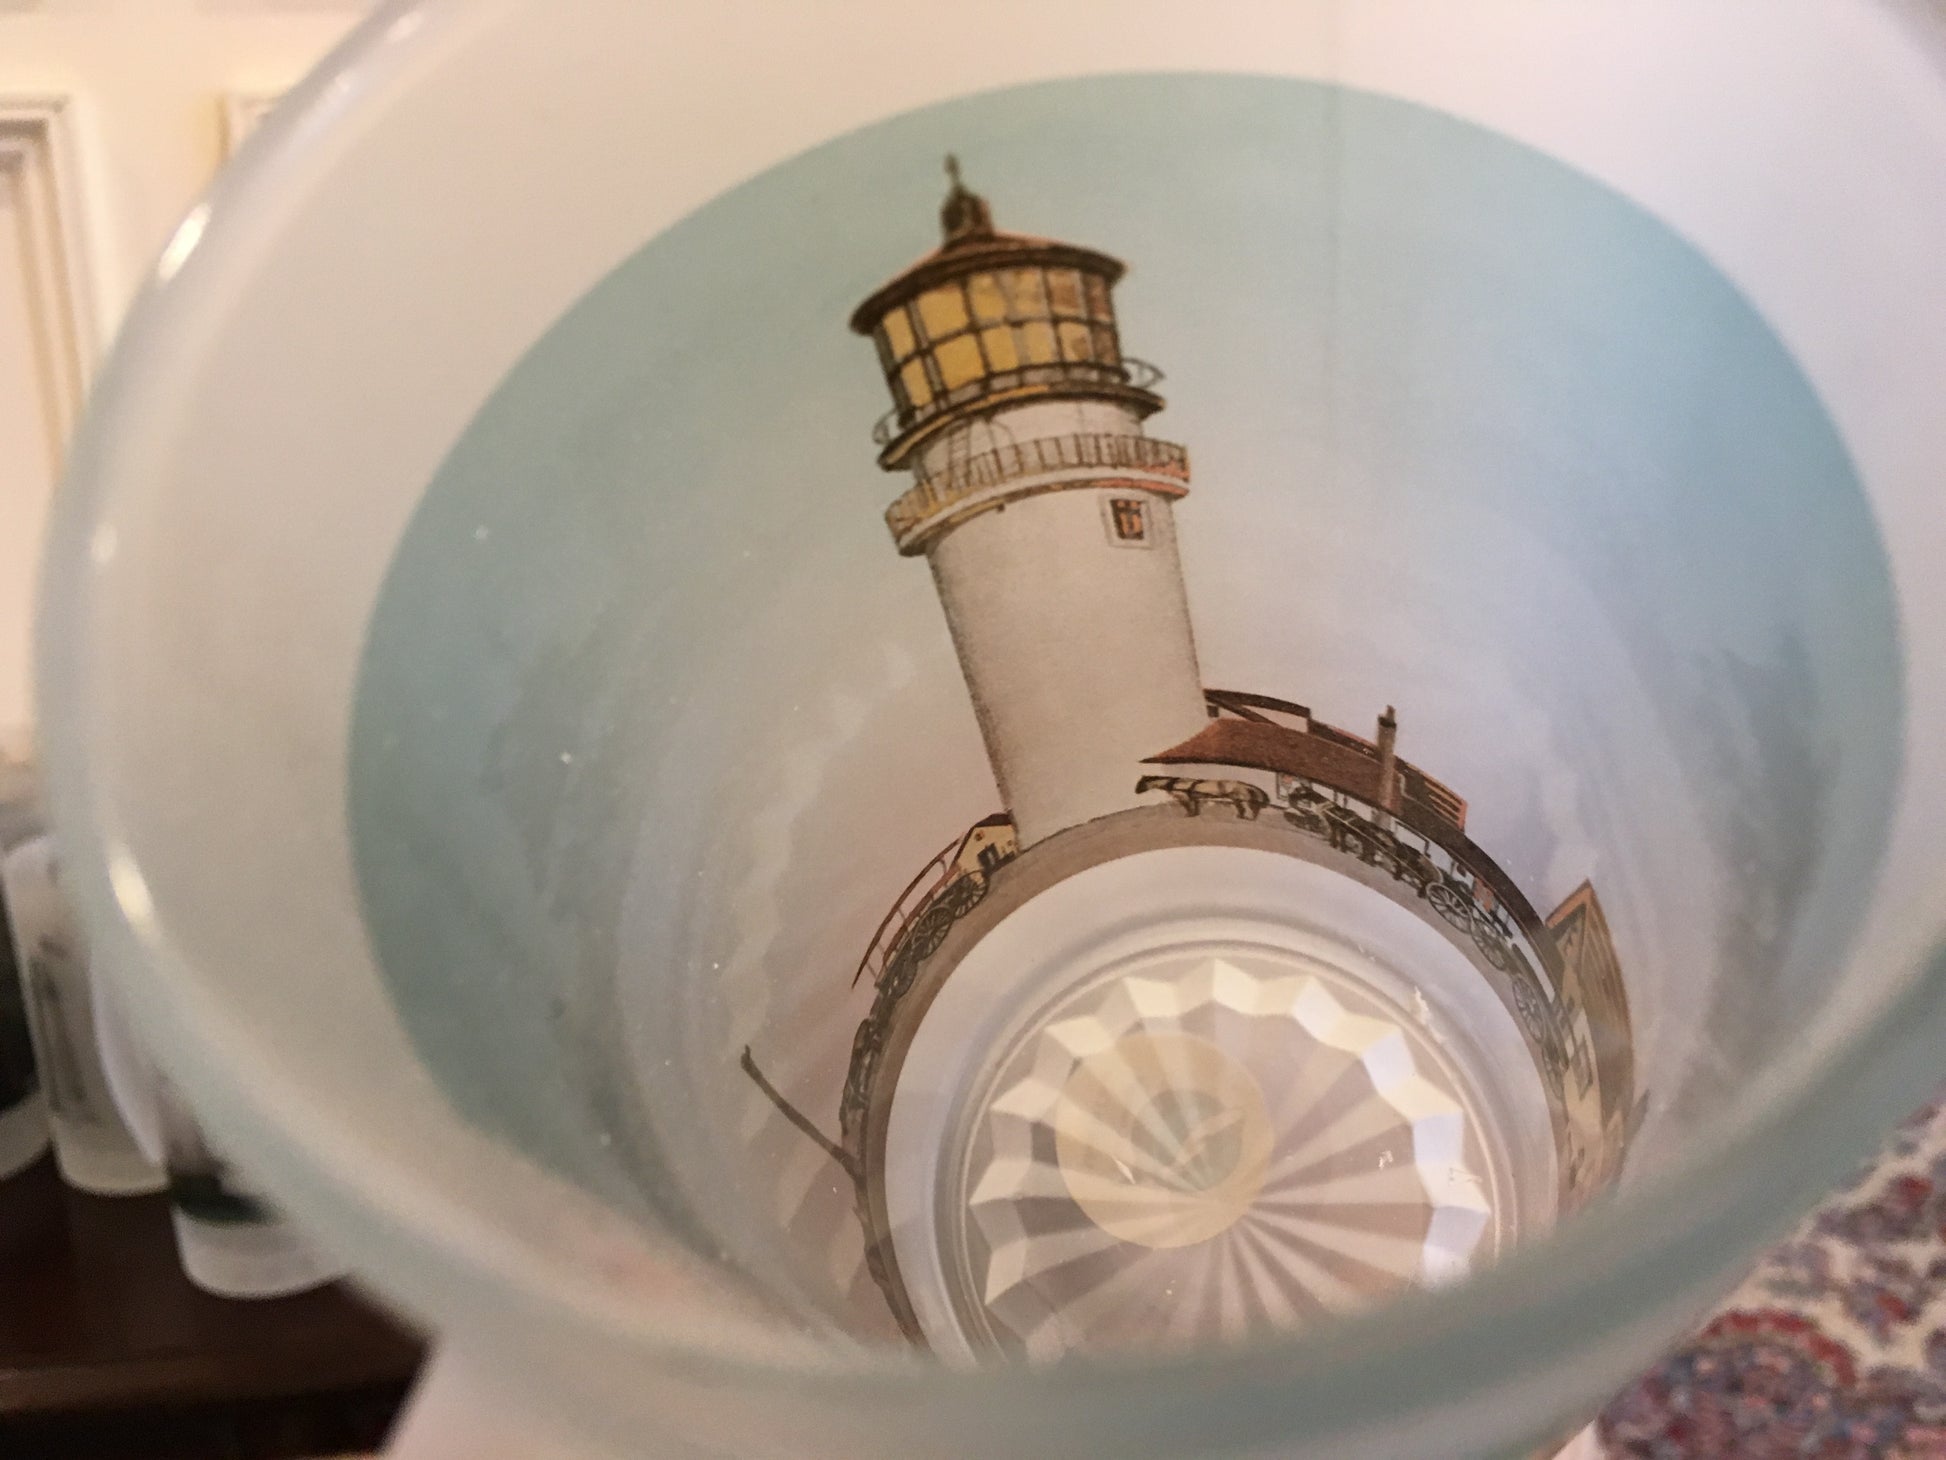 Colorful Frosted Glass Mug of Cape Cod's Highland Light - That Fabled Shore Home Decor